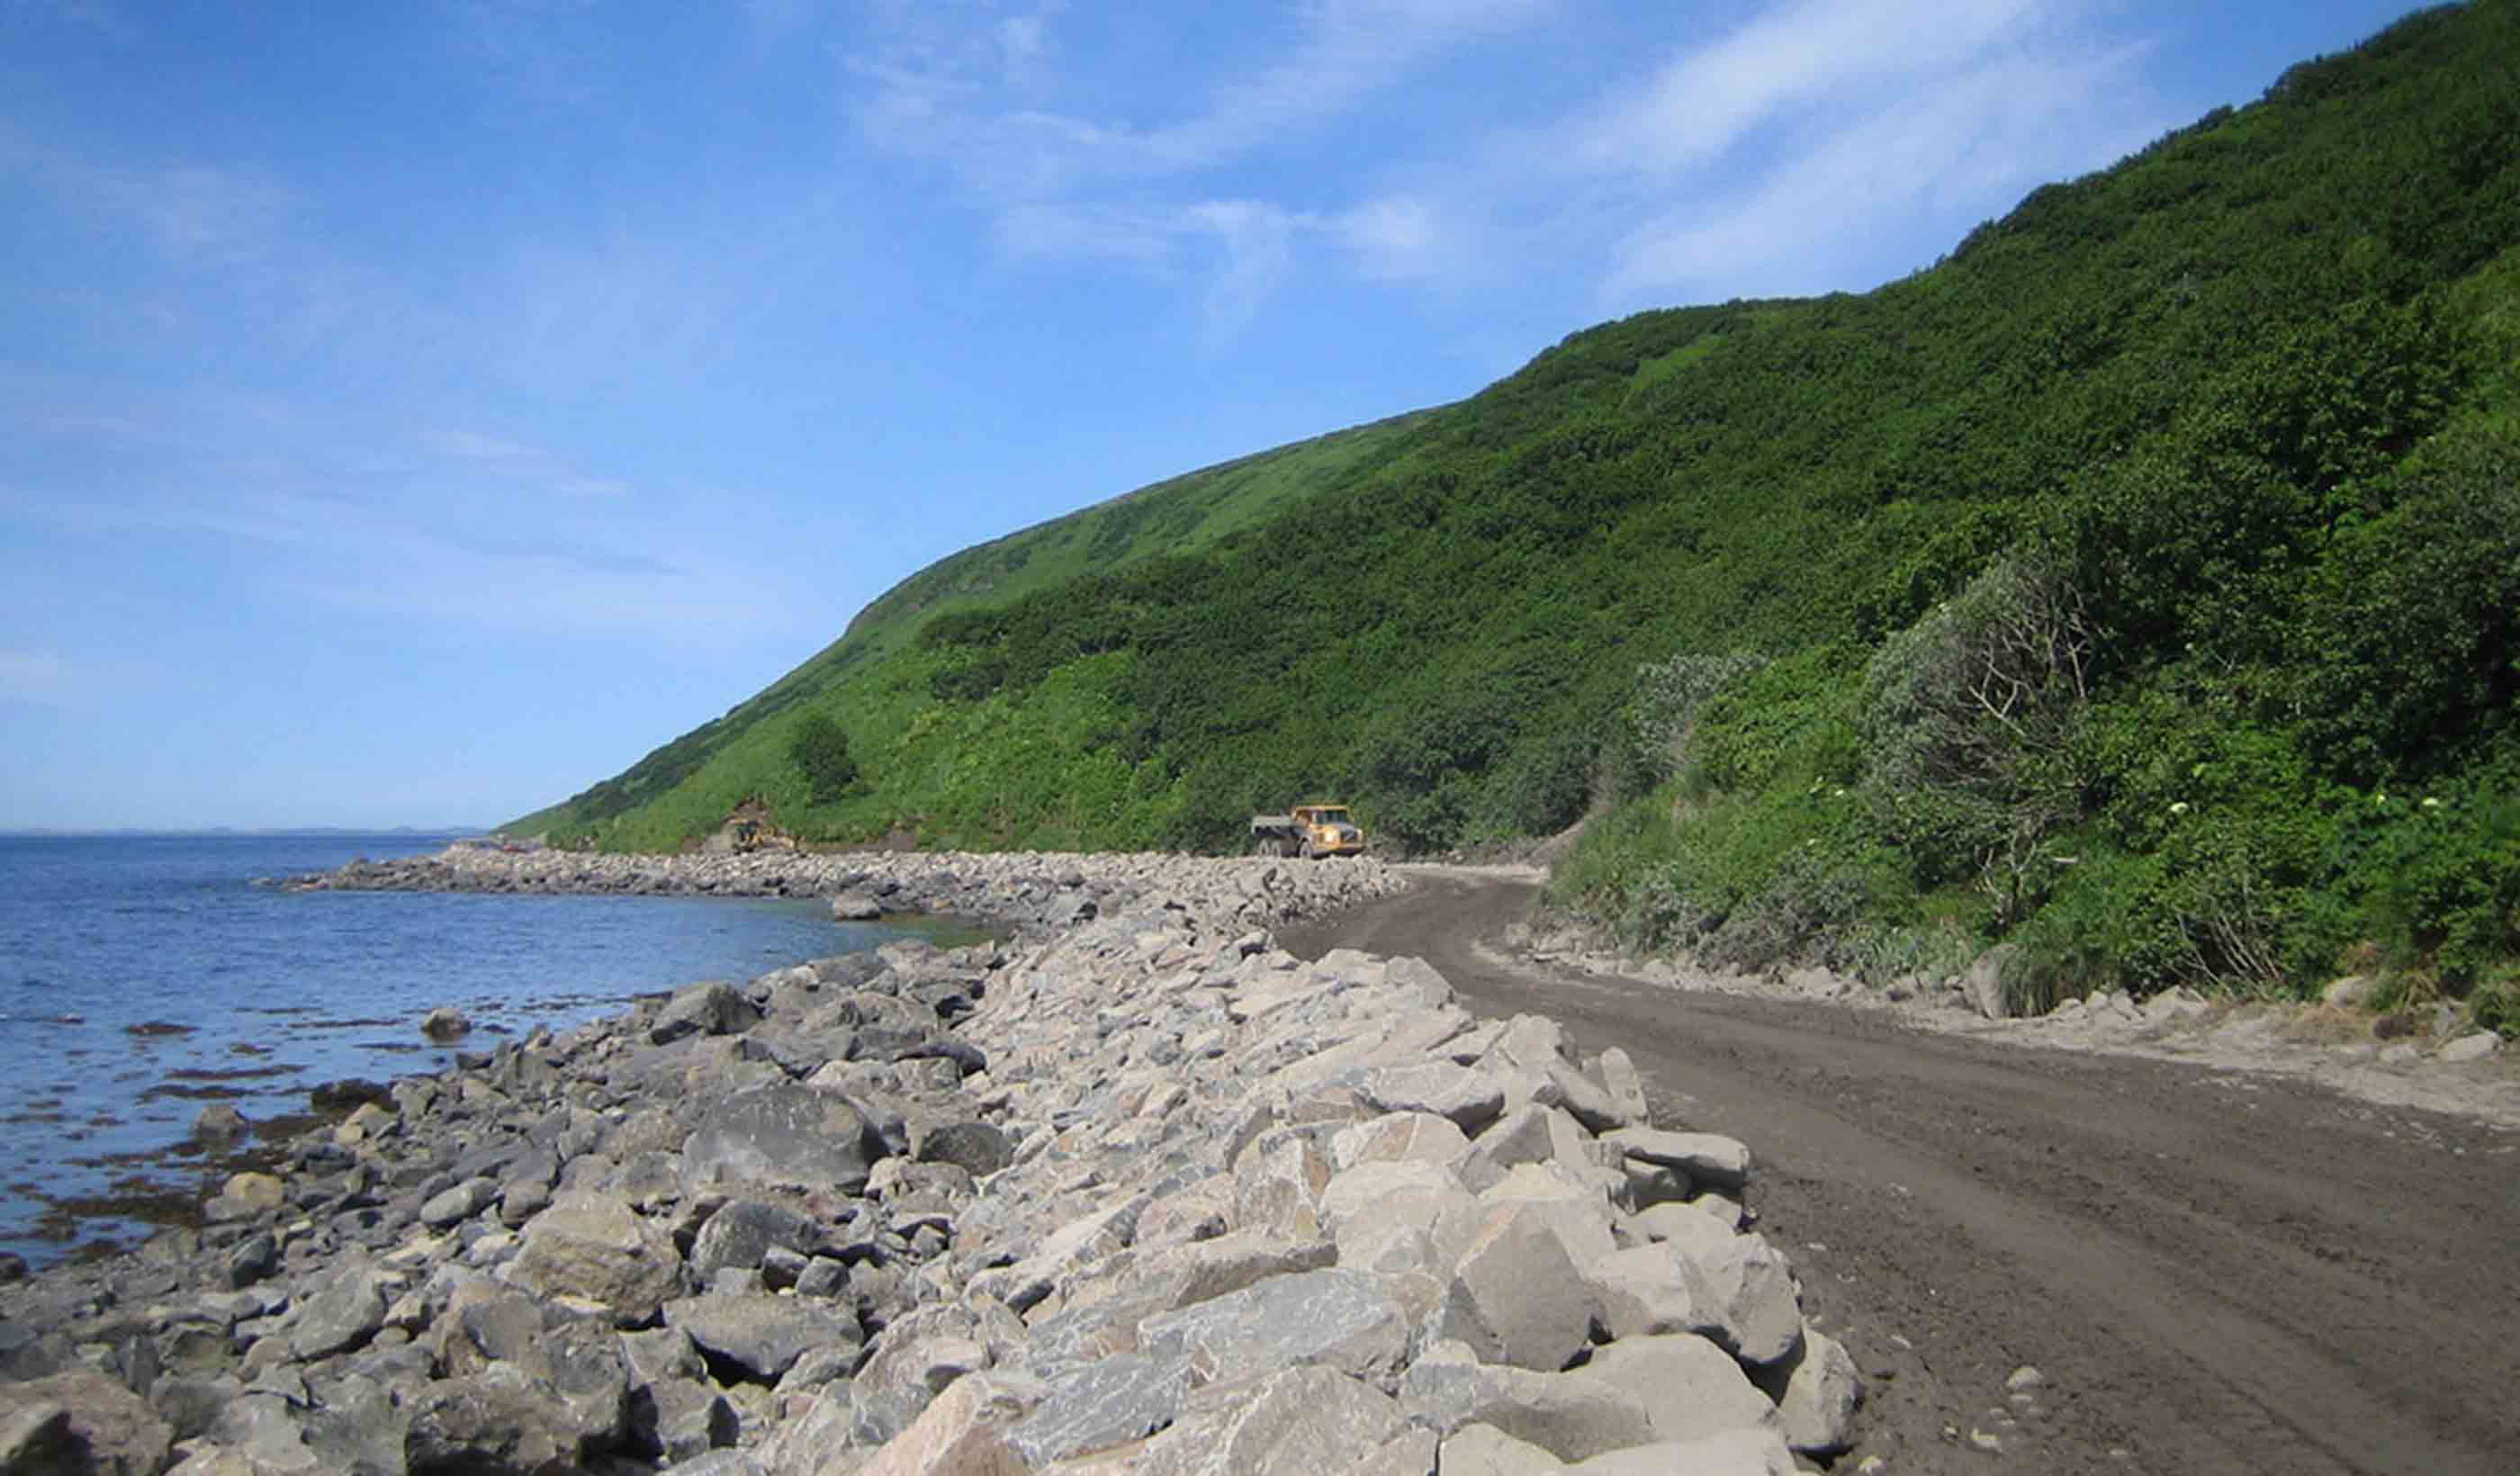 King Cove Road: Balancing the needs of people and nature in remote Alaska